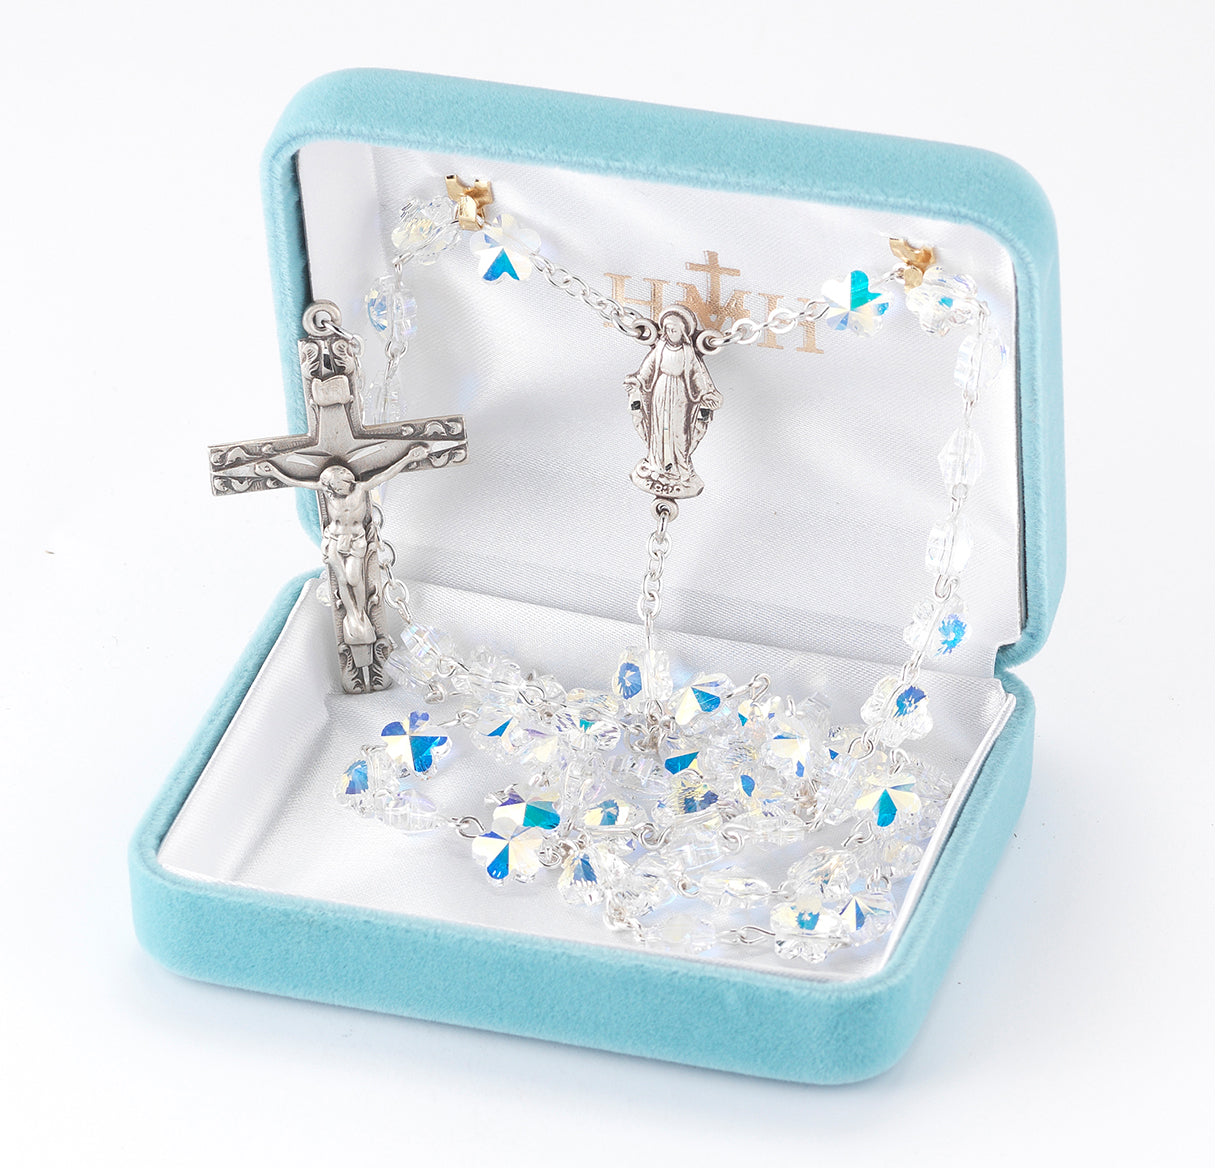 Rosary Sterling Crucifix and Centerpiece Created with Swarovski Crystal 8mm Heart Shape Aurora Borealis Beads by HMH